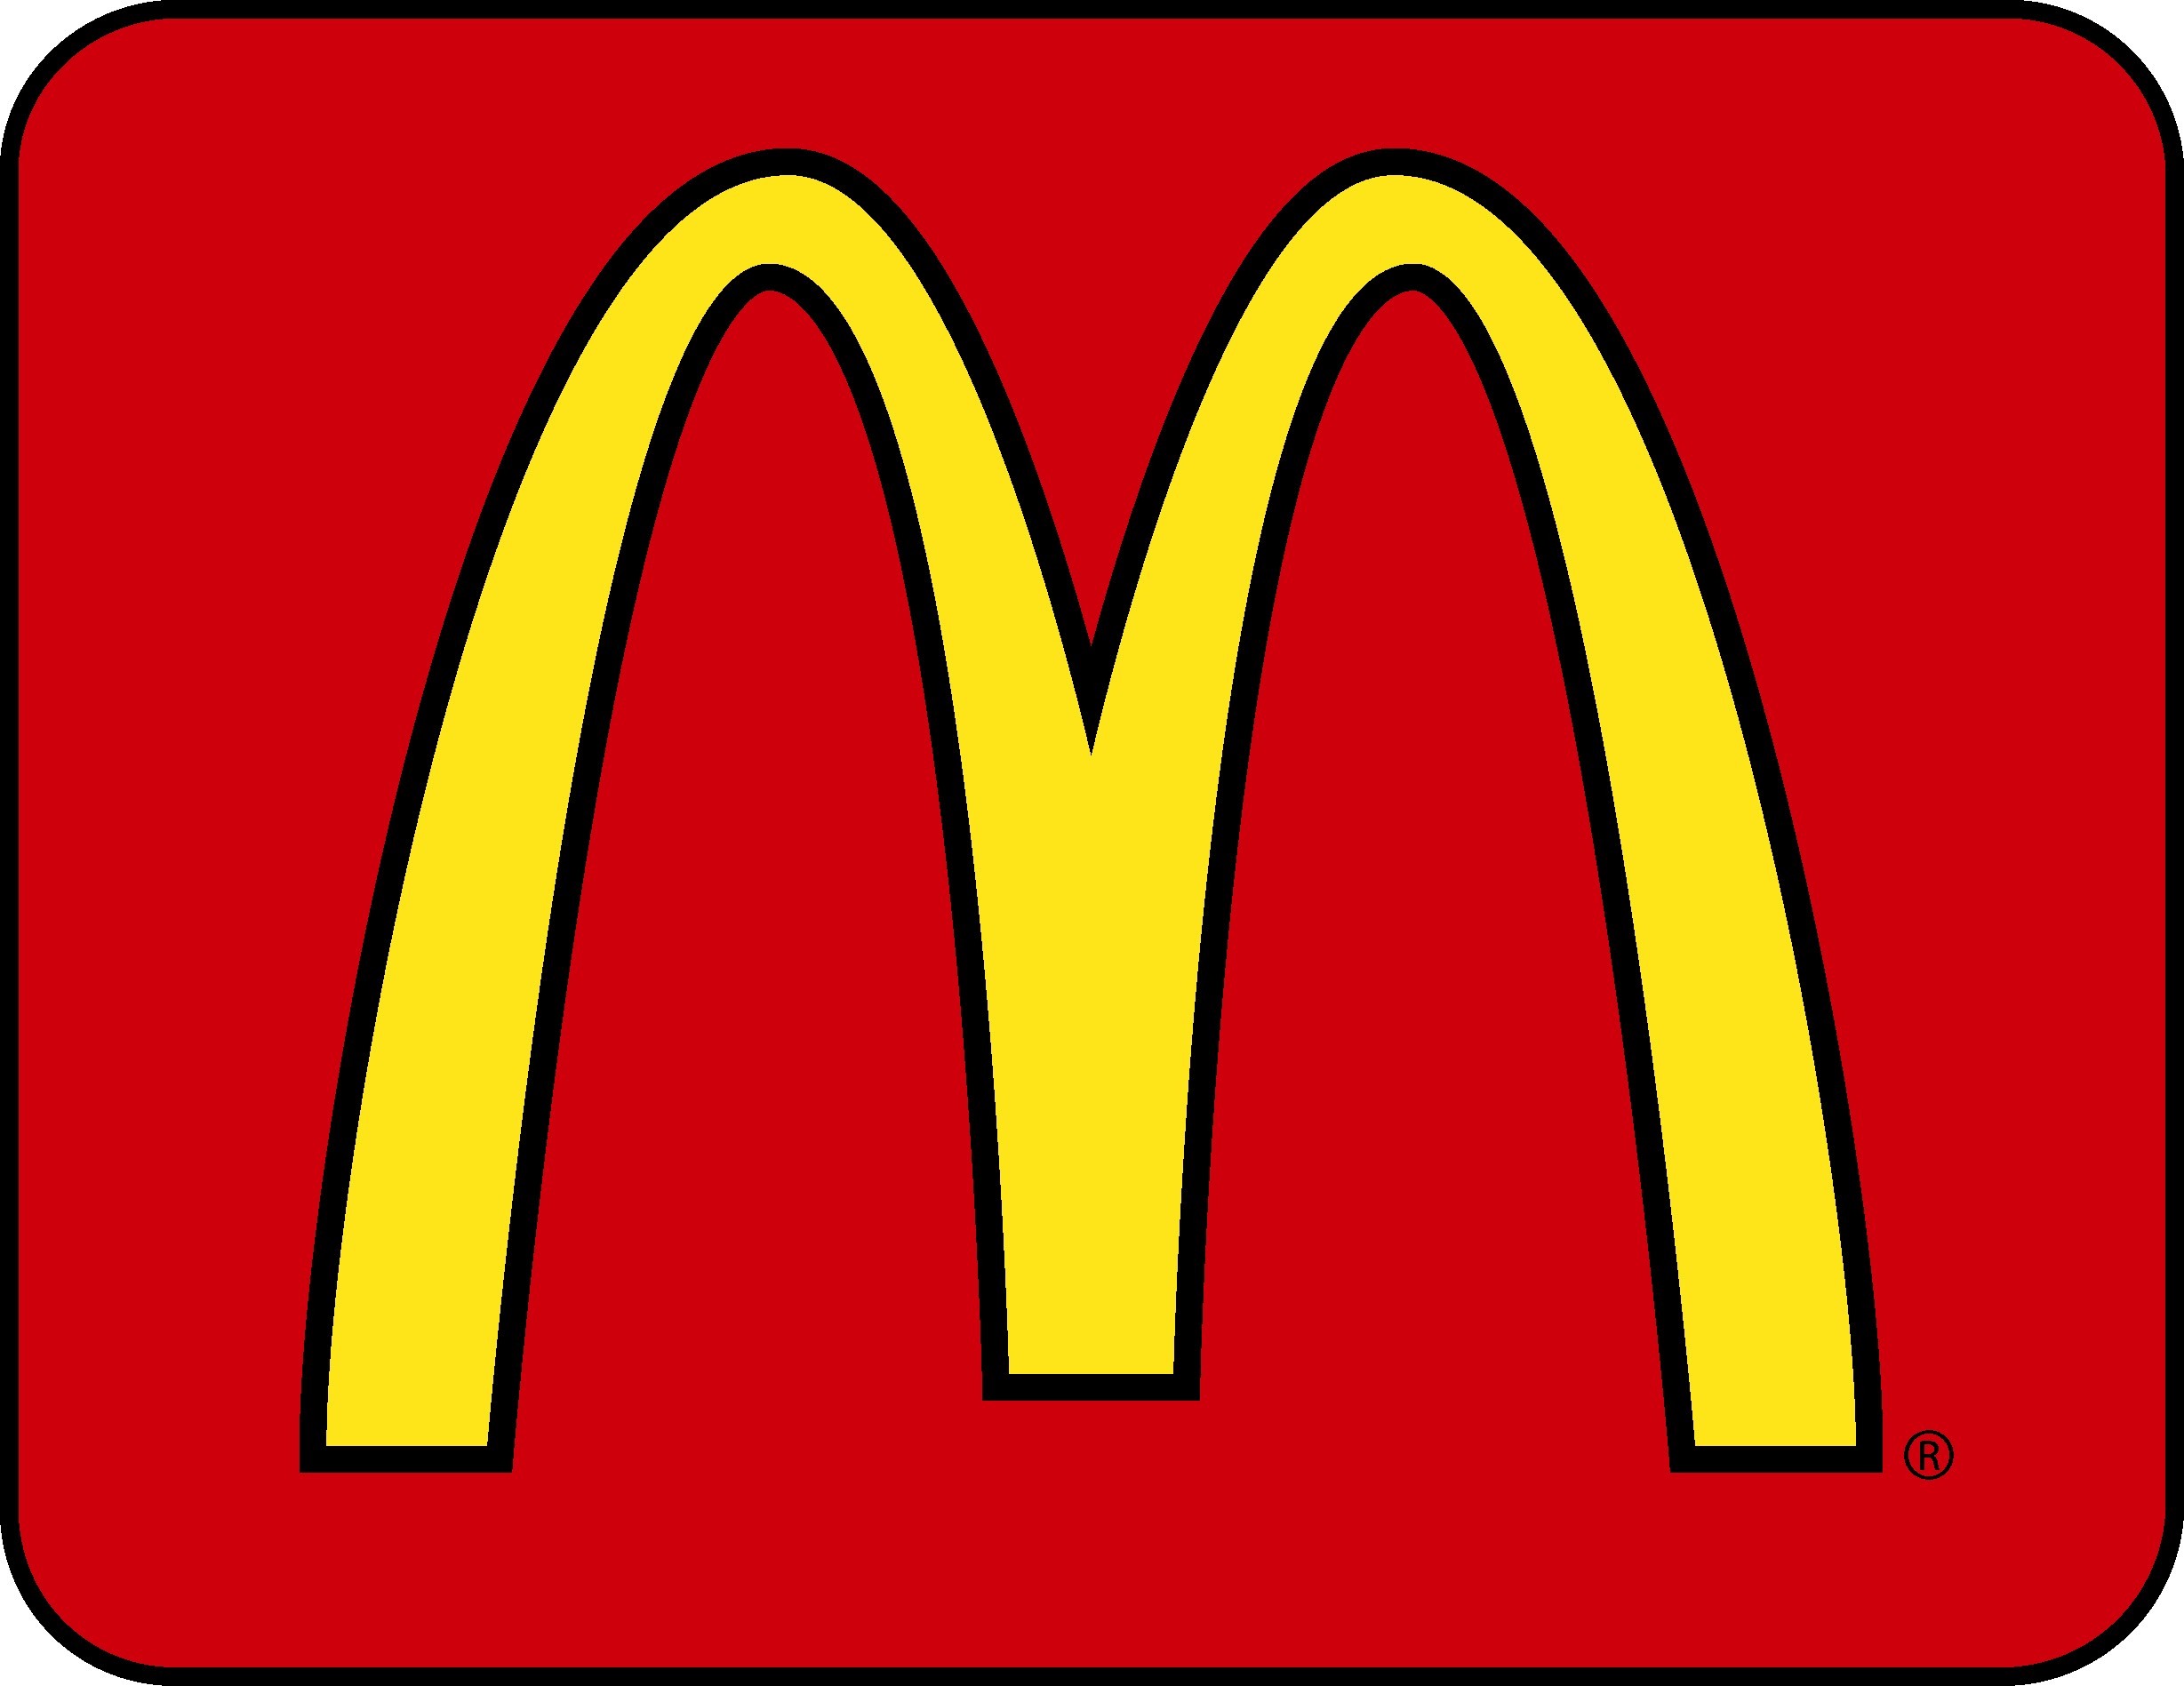 Mcdonalds clipart golden arches. Free arch cliparts download